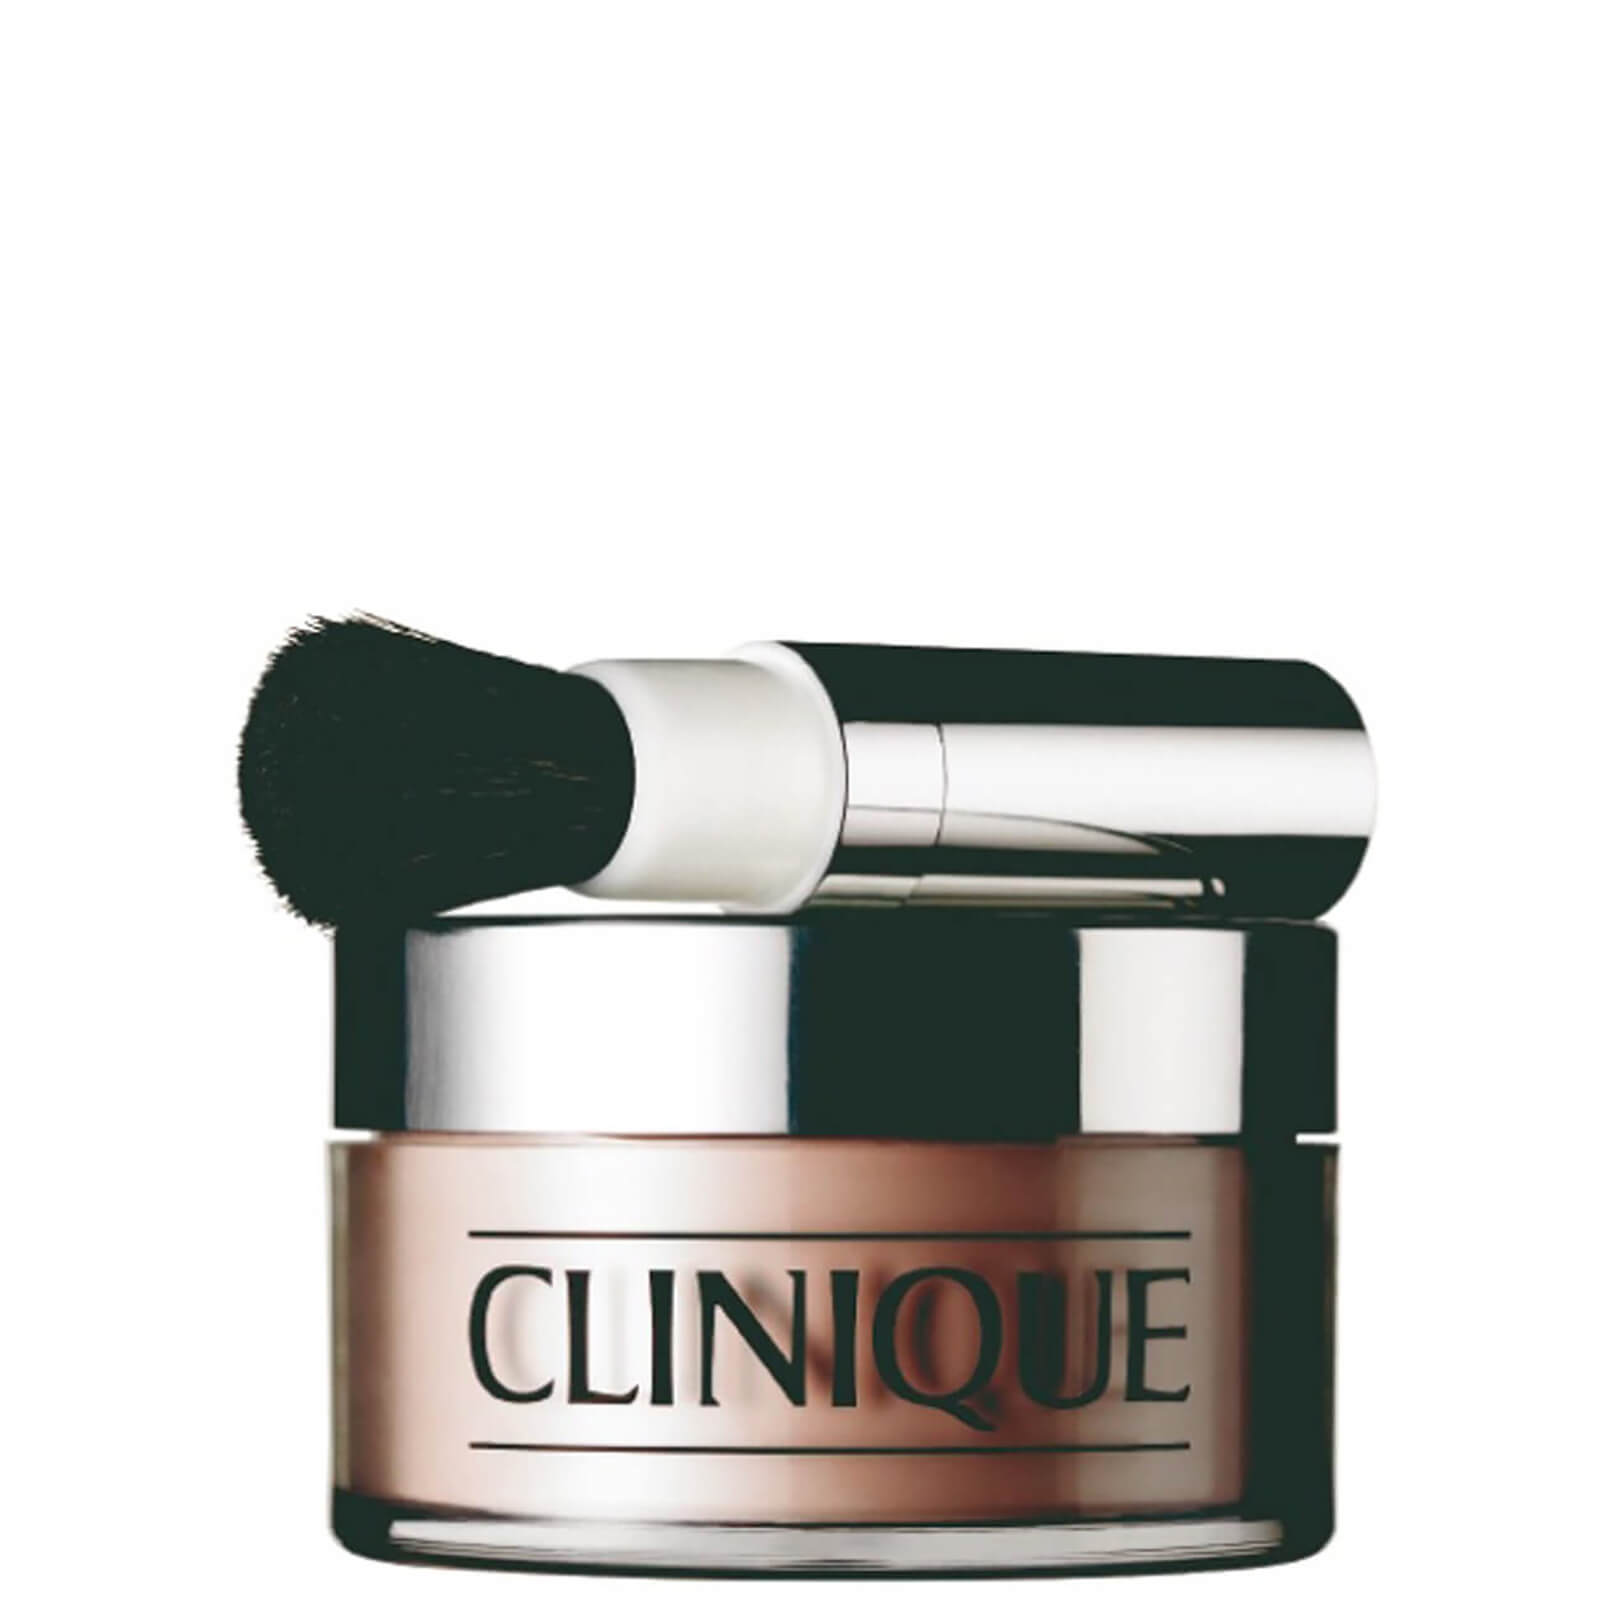 Clinique Blended Face Powder and Brush 35 g - Transparency 3